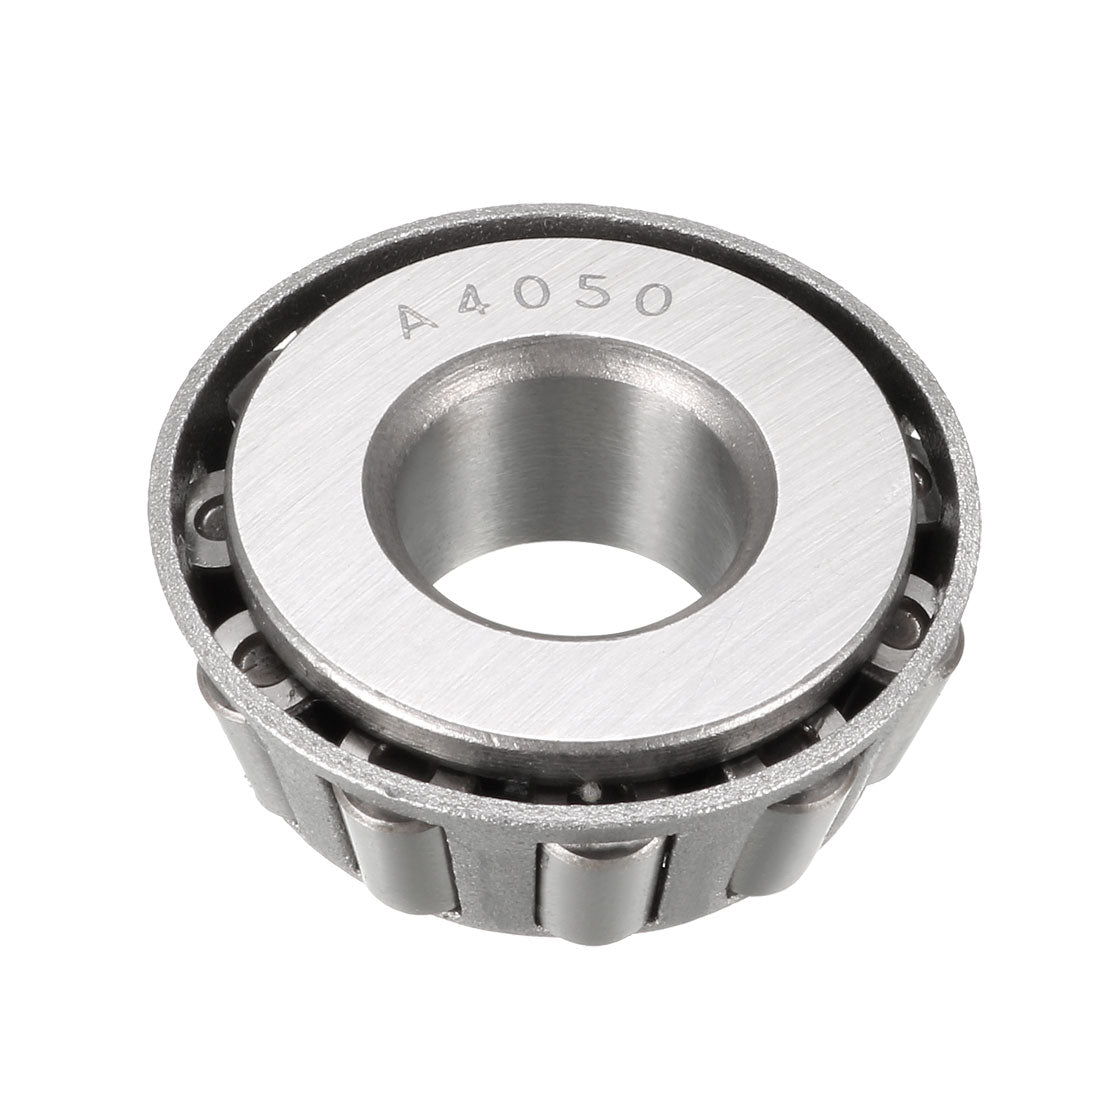 Uxcell Uxcell A4050 Tapered Roller Bearing Single Cone 0.5" Bore 0.4326" Width